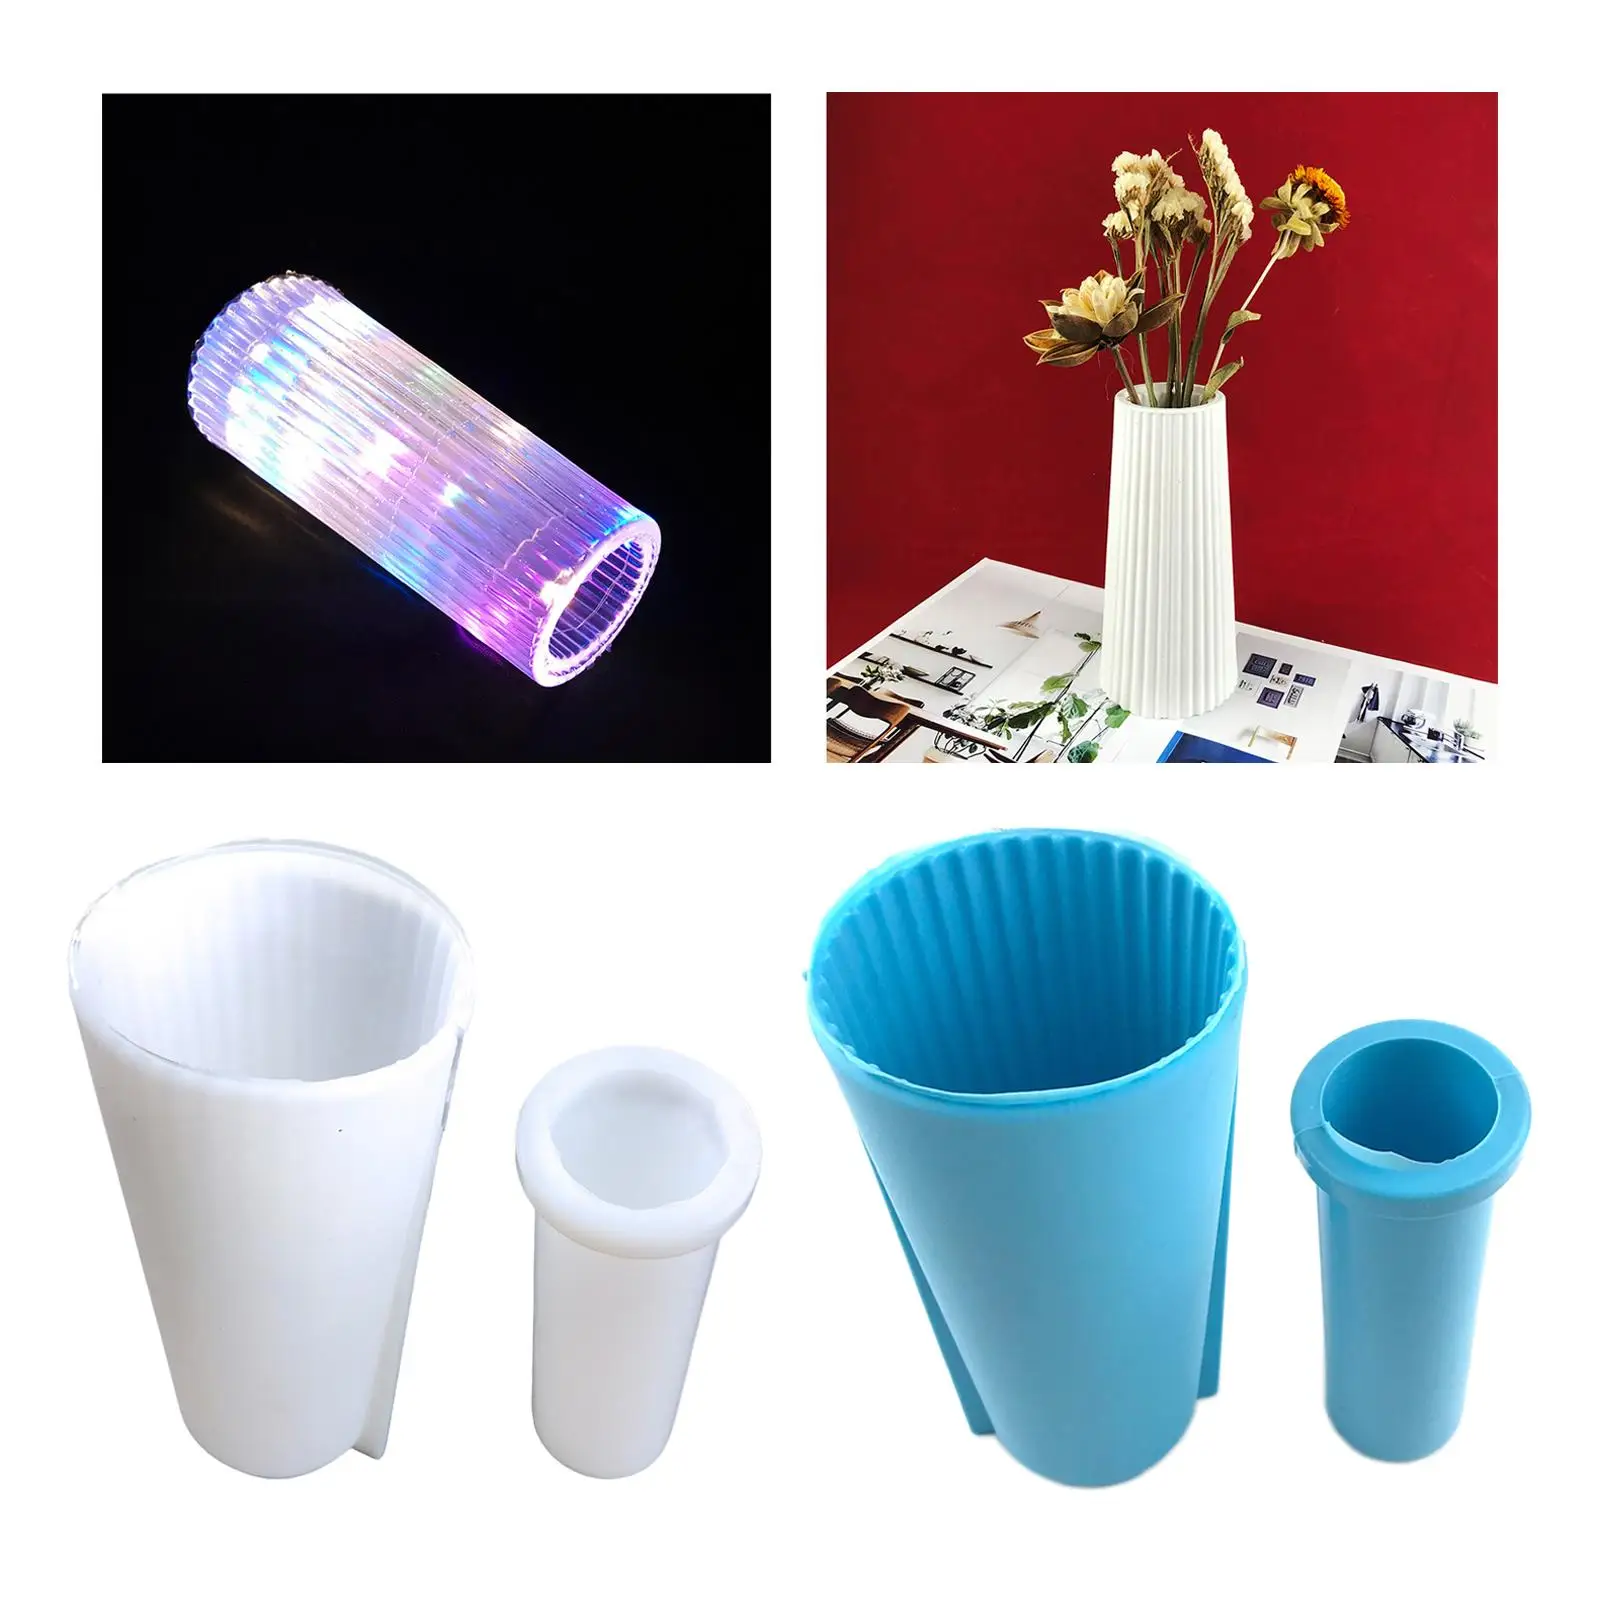 2 Pieces Flower Vase Silicone Mold DIY Making Home Crafts for Supplies